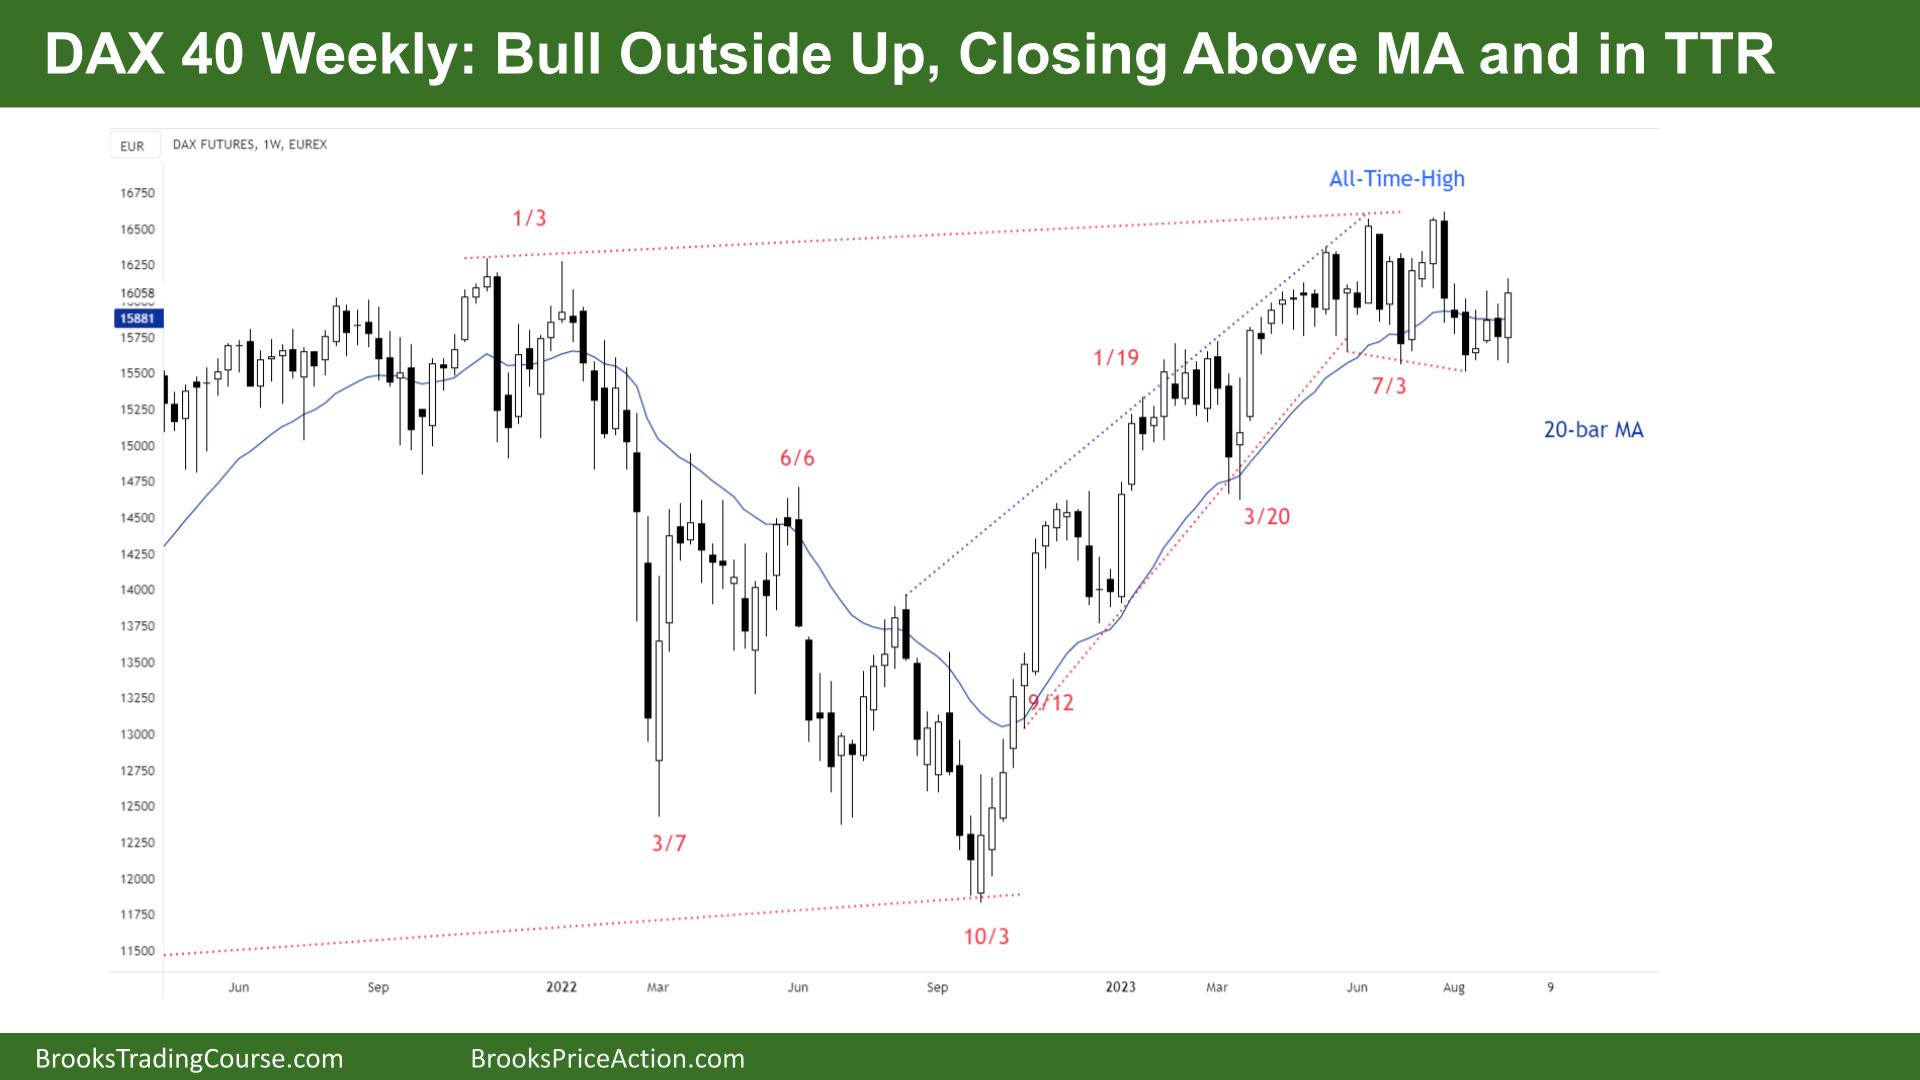 DAX 40 Bull Outside Up, Closing Above MA and in TTR